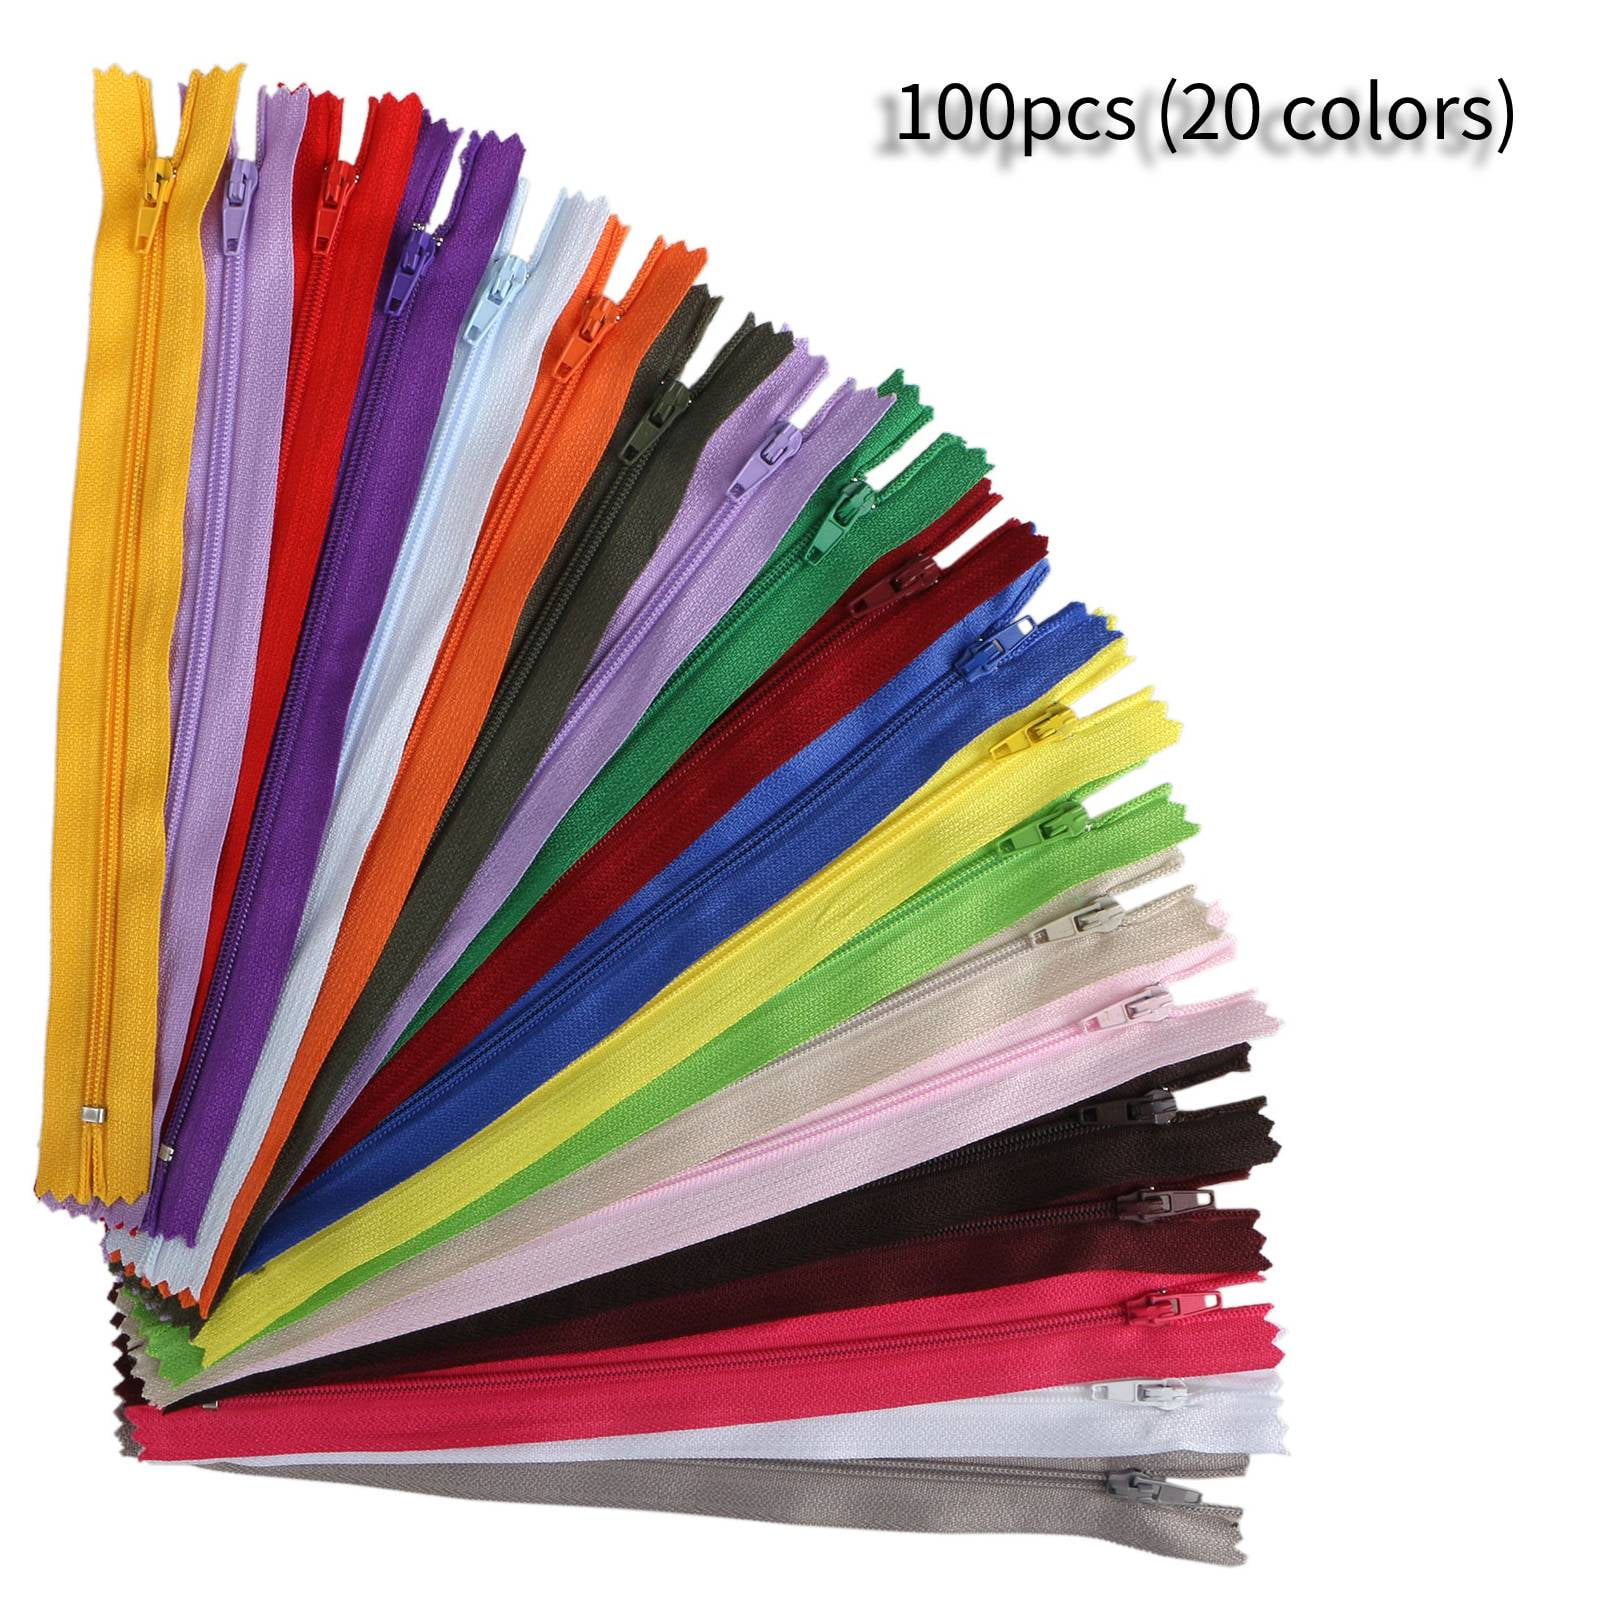 10pcs 20cm Nylon Coil Zippers for Tailor Sewing Crafts Nylon Zippers Bulk  40 Colors zipper slider pull sewing accessories - AliExpress